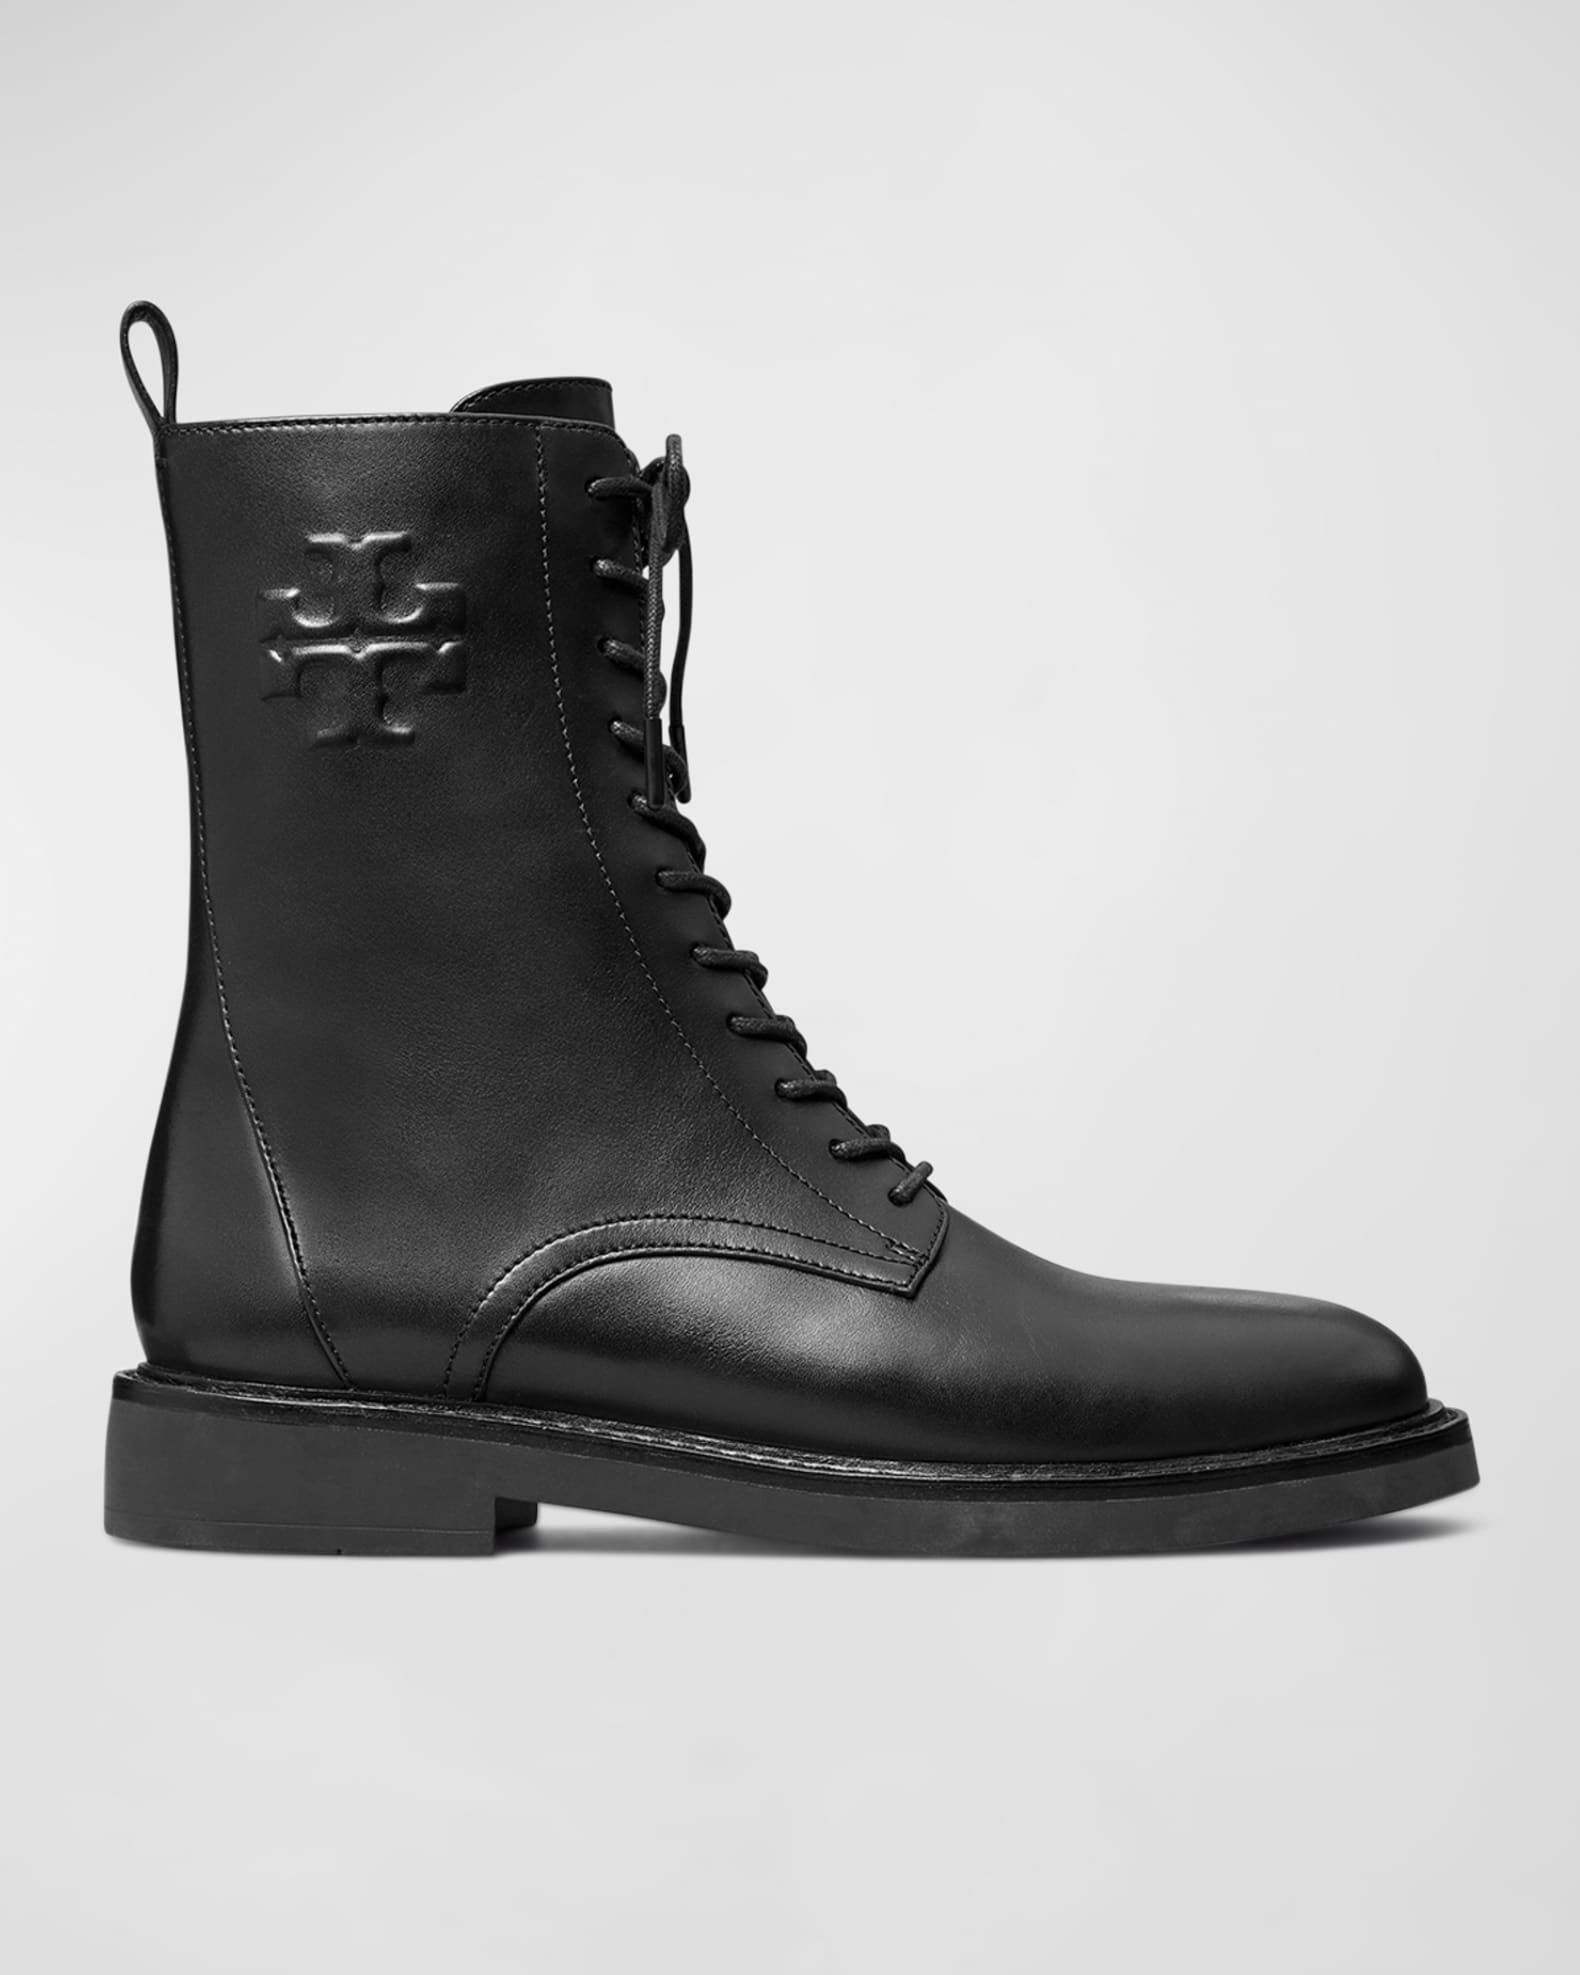 15 LV Boot outfit ideas  lv boots, combat boot outfit, boots outfit